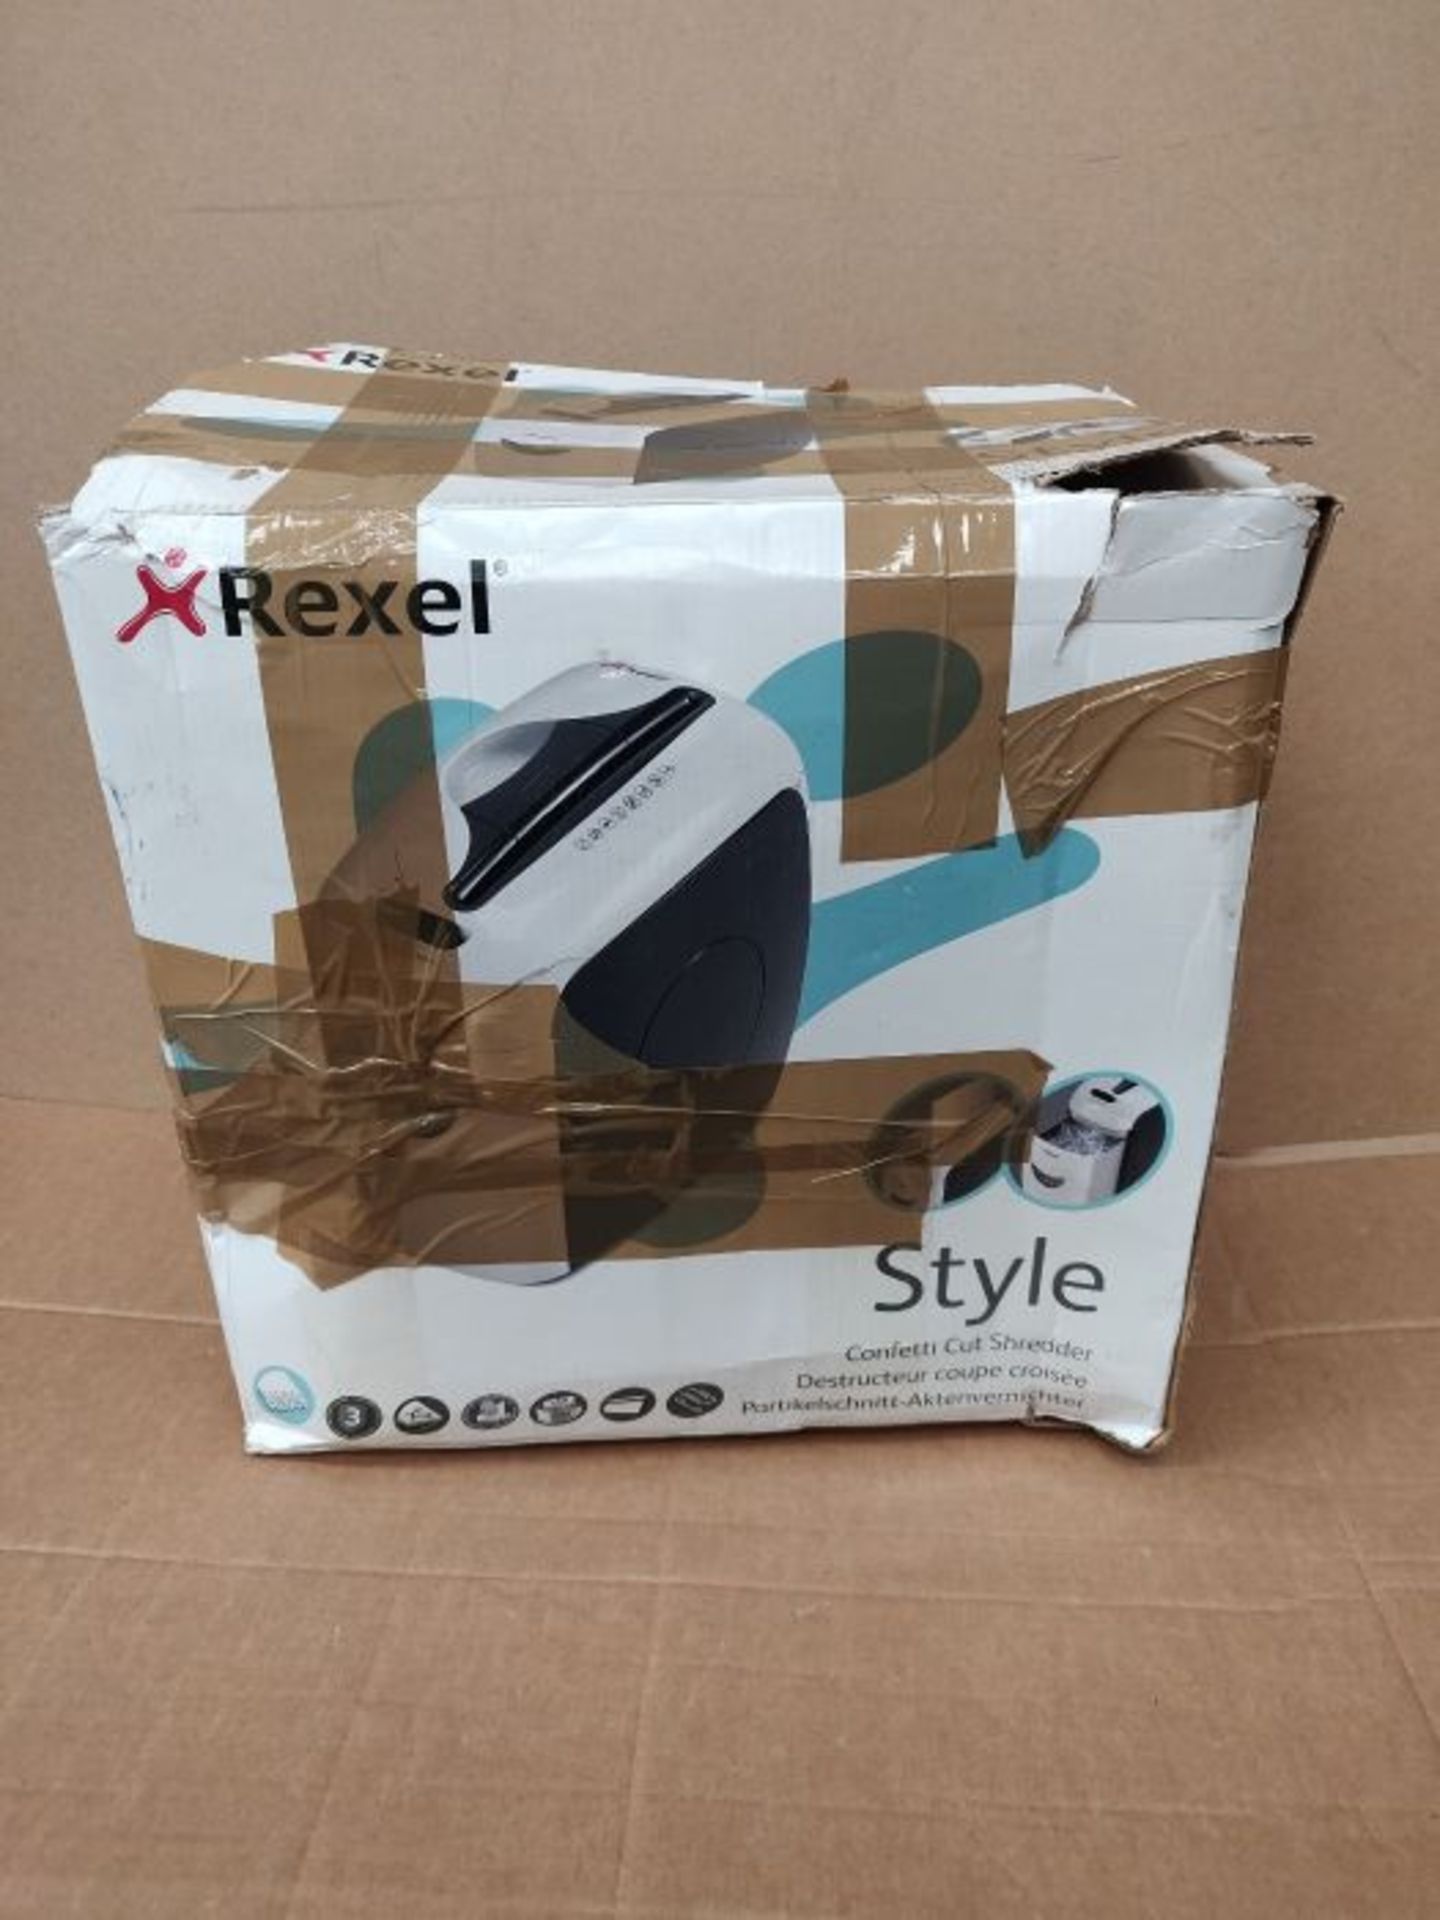 Rexel 2101942UK Style 5 Sheet Manual Cross Cut Shredder for Home or Small Office Use,